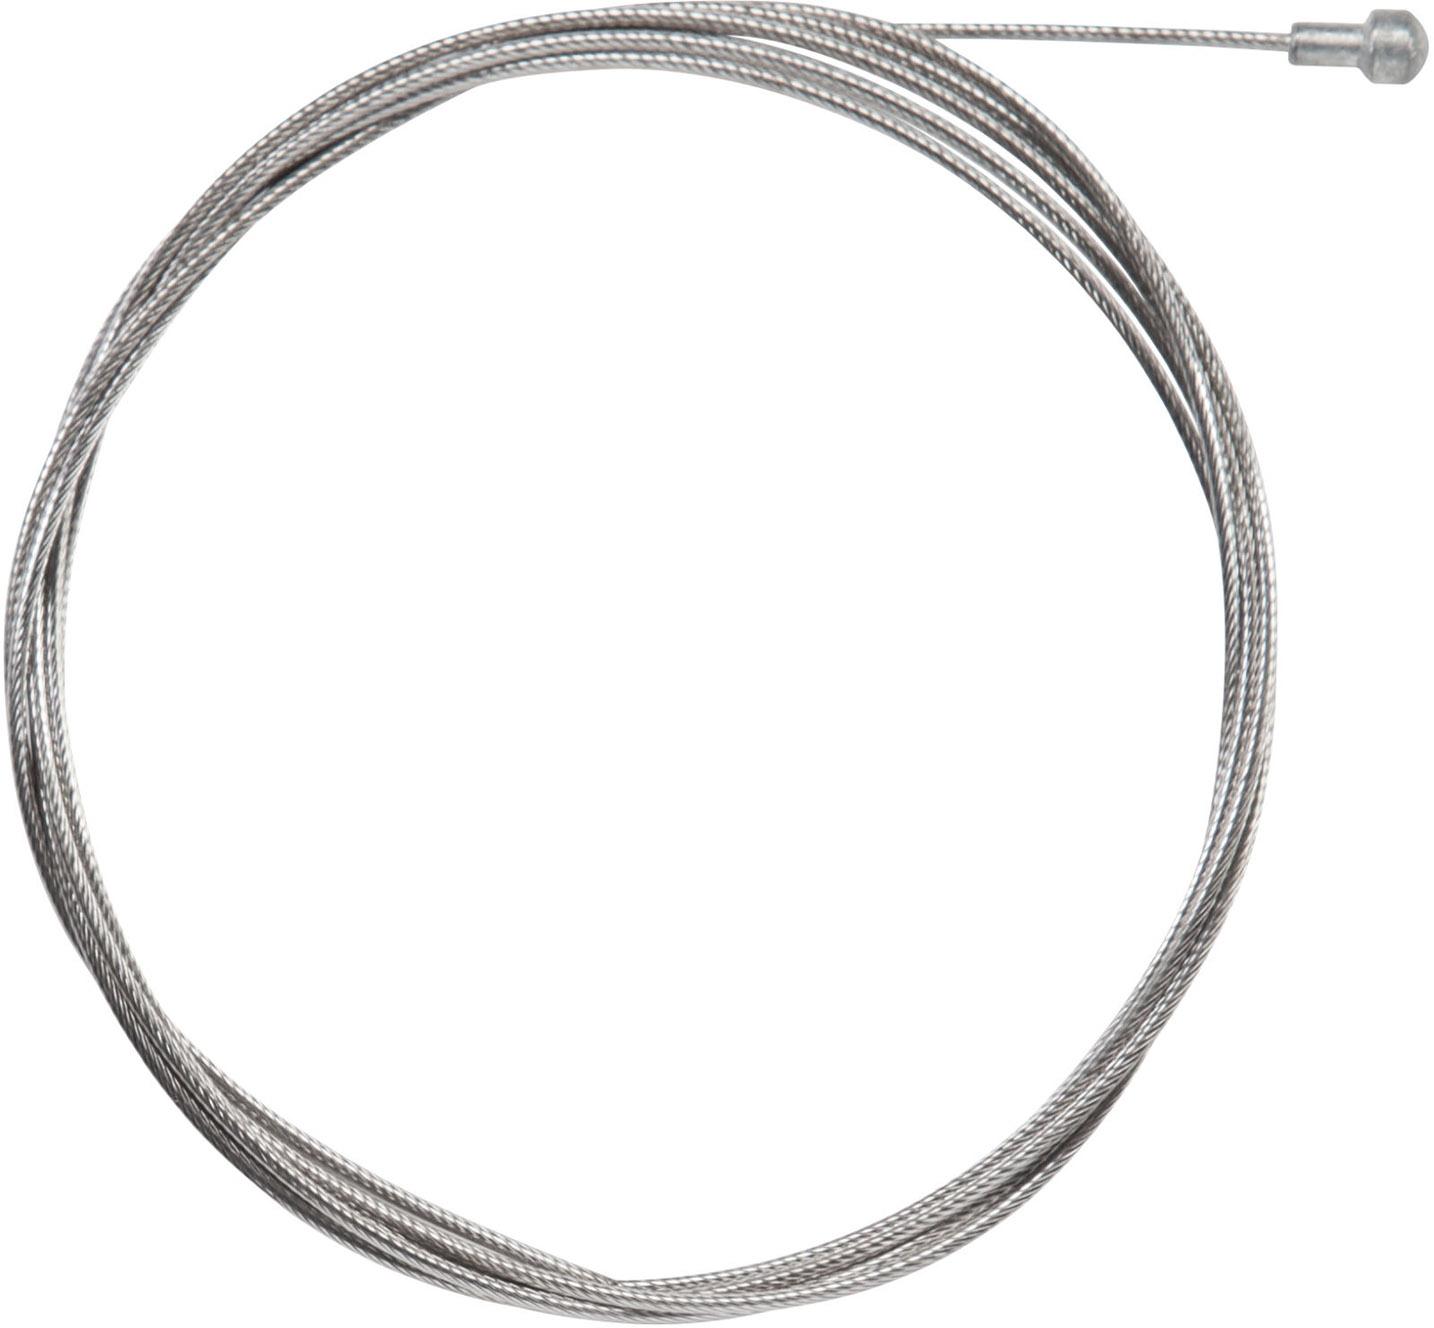 Sram Stainless Road Brake Cable - Silver